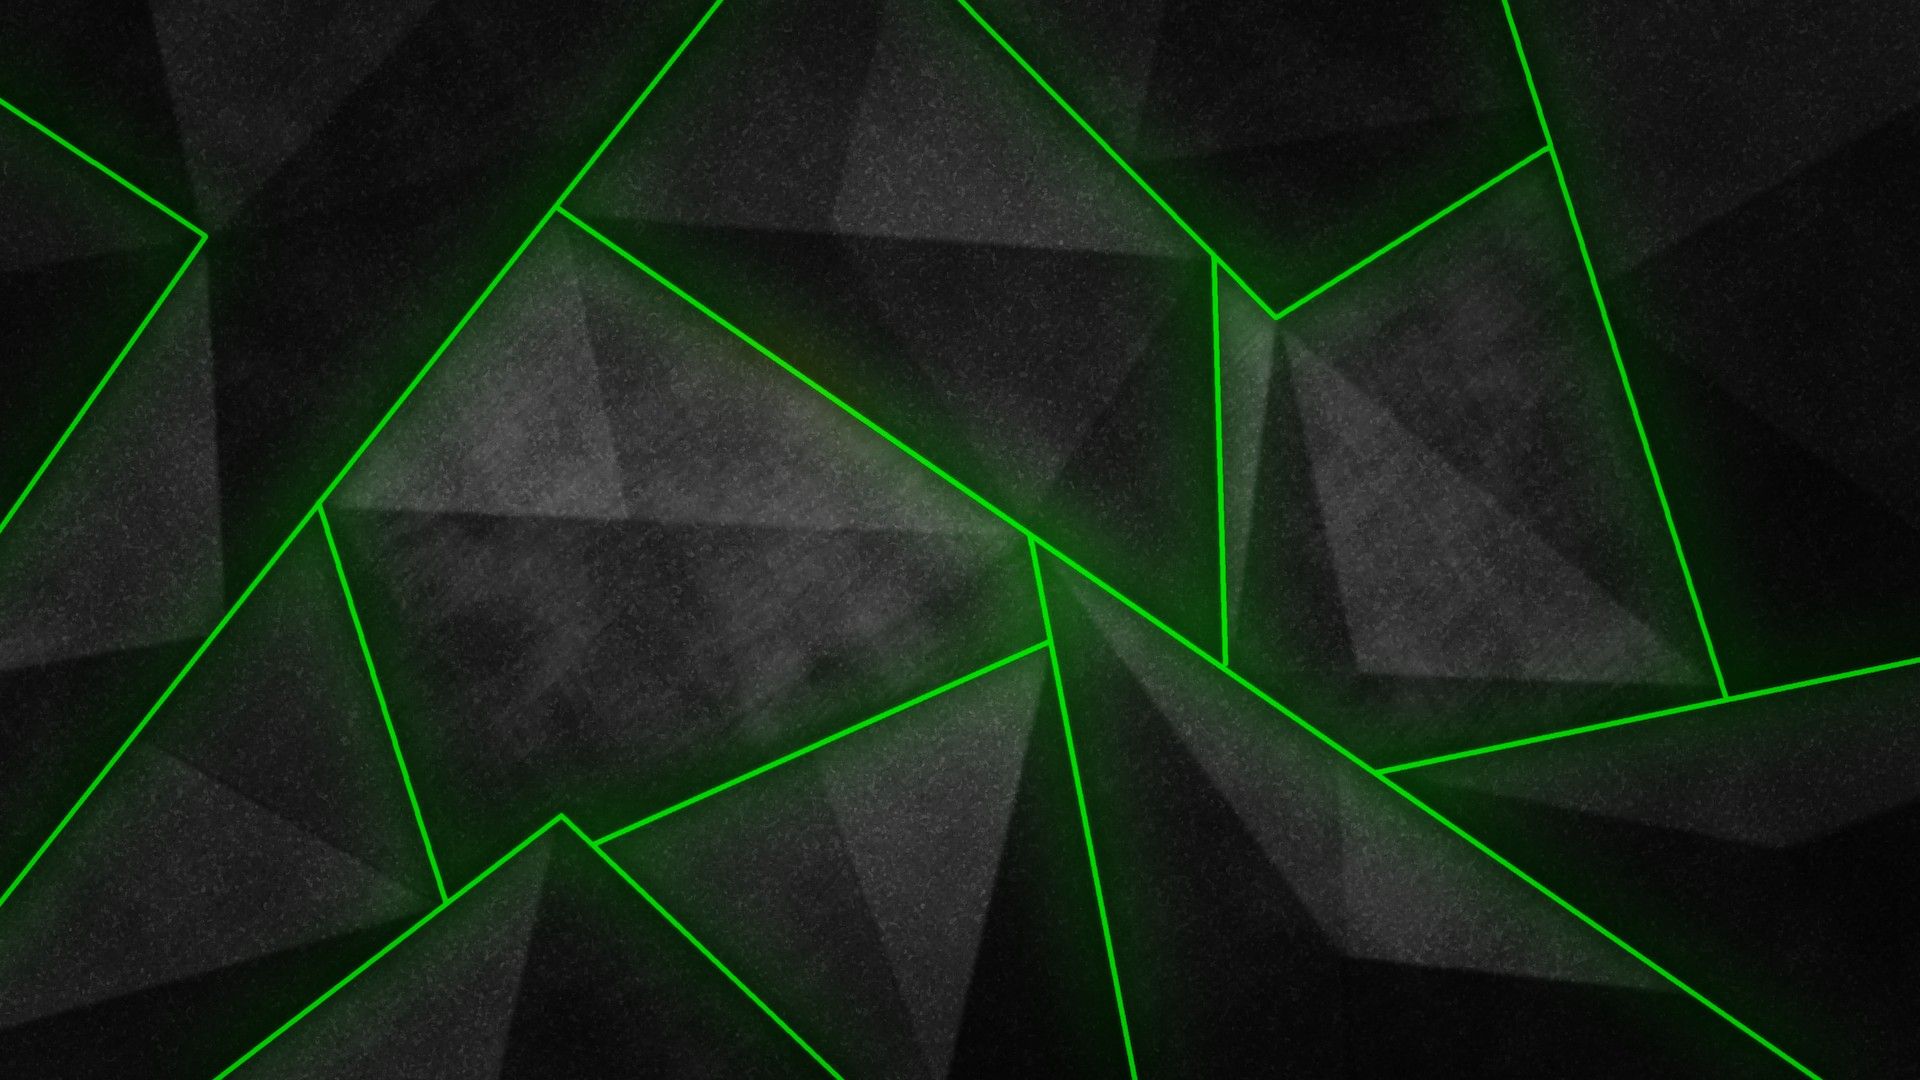 free cool Black Green Shards chrome extension HD wallpaper theme tab for chrome browser!